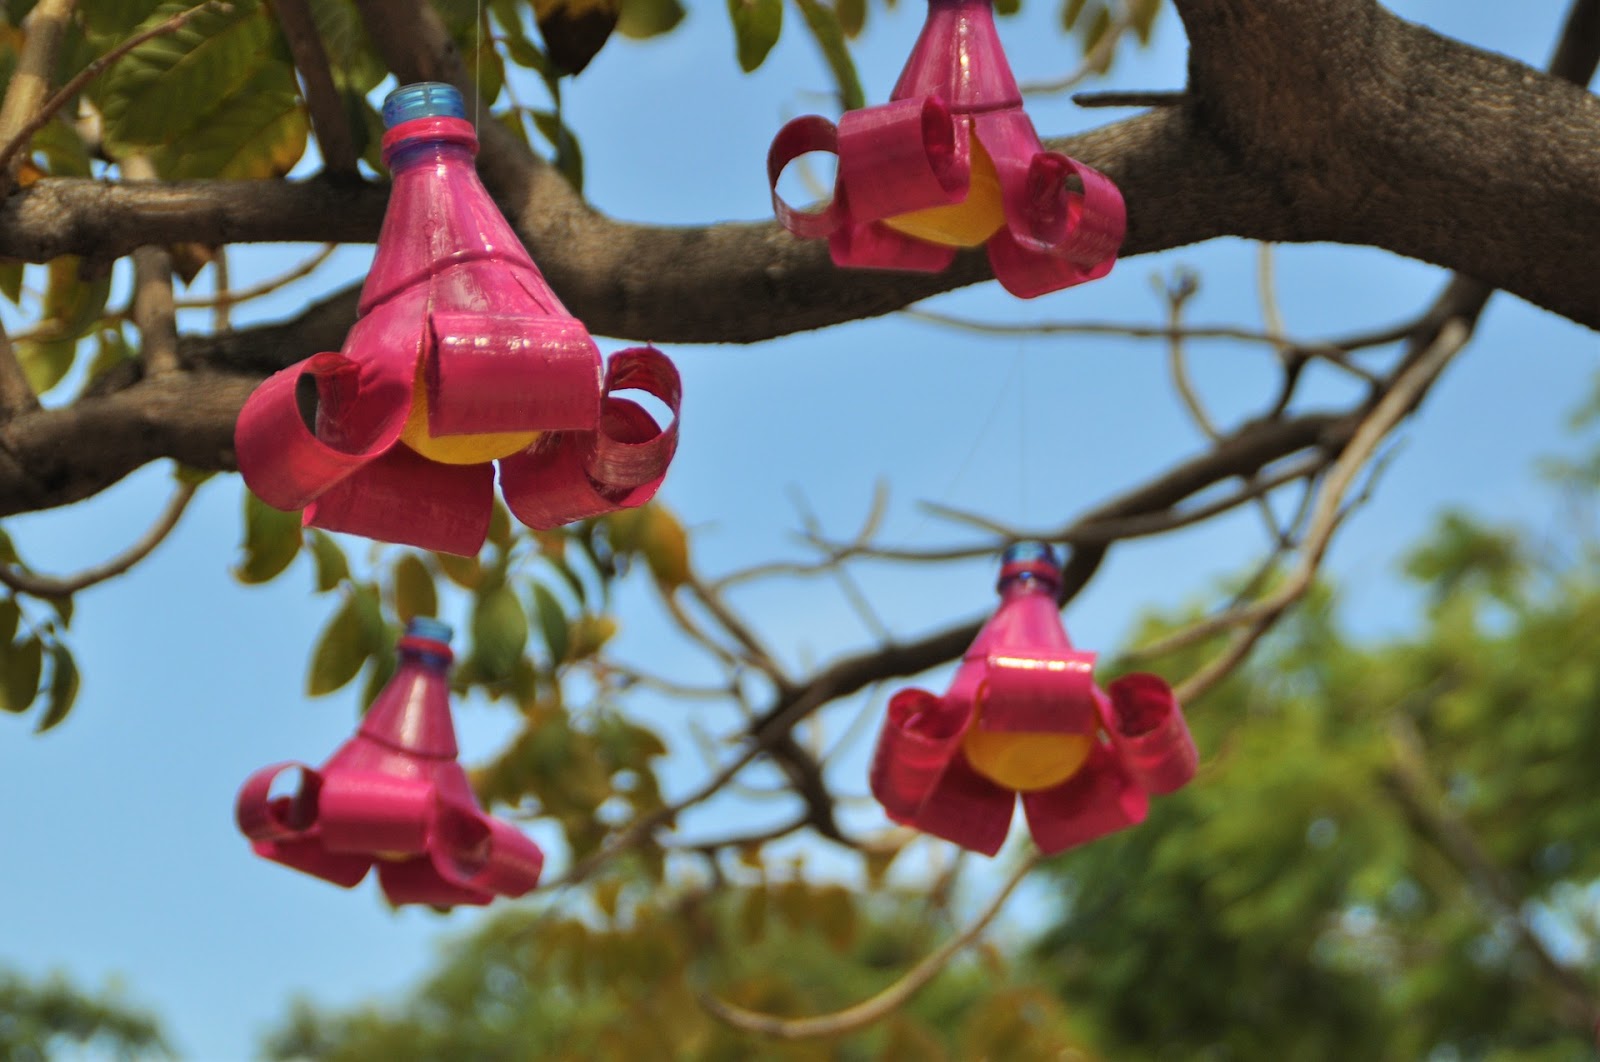 A tree with pink decorations hanging